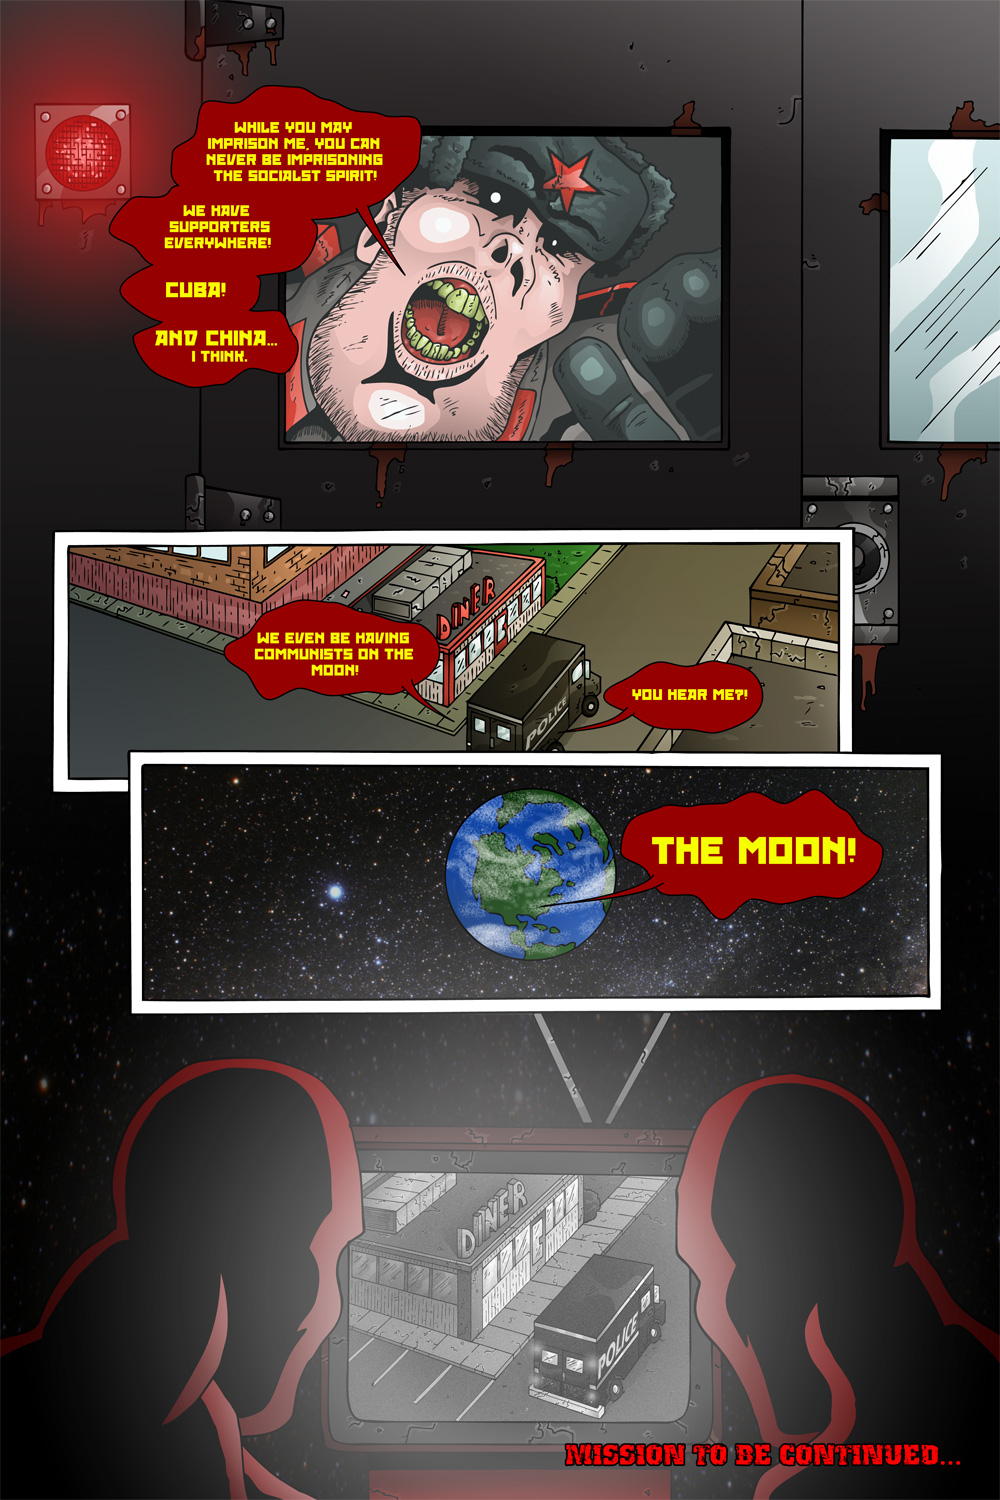 MISSION 005: PAGE 24 “THE MOON!